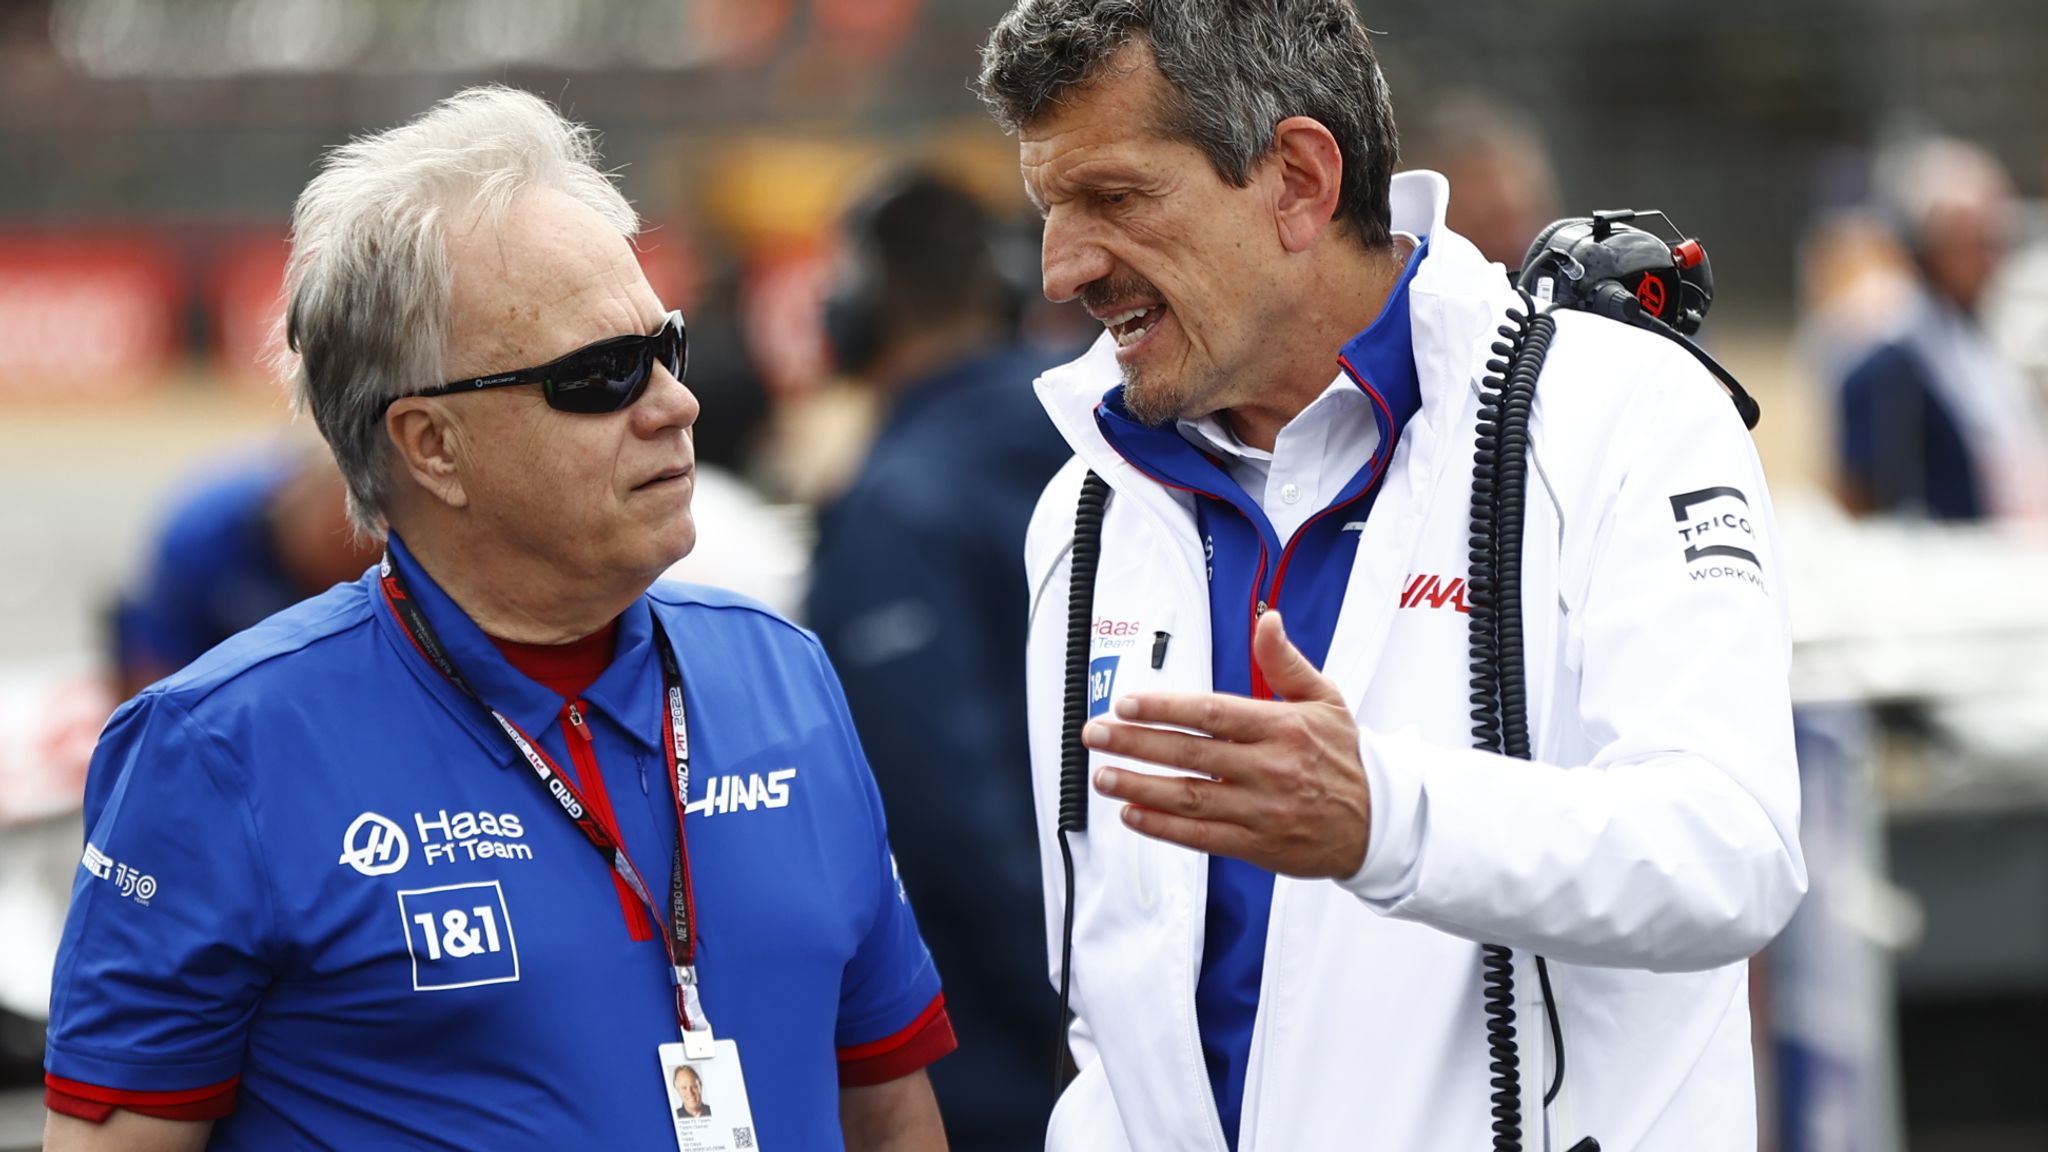 Guenther Steiner: Former Hass boss speaks out for first time on F1 exit ...